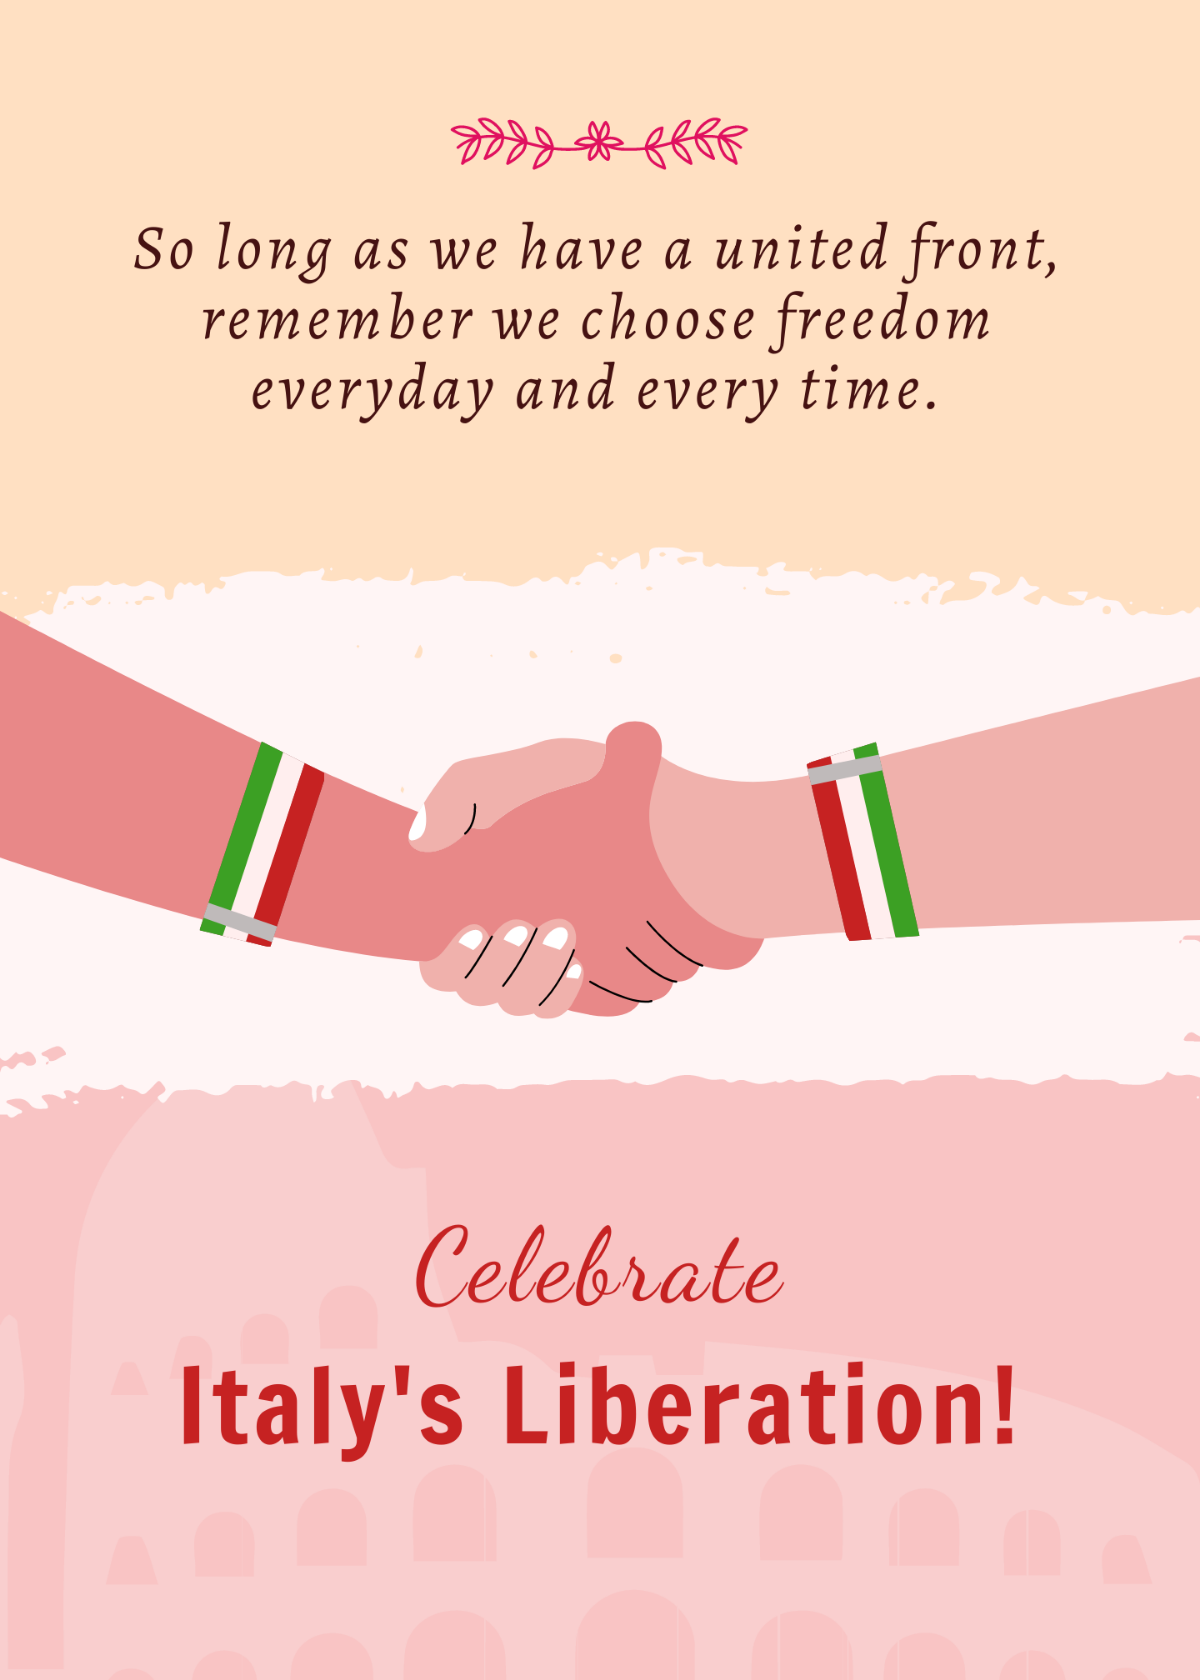 Italy Liberation Day Message 